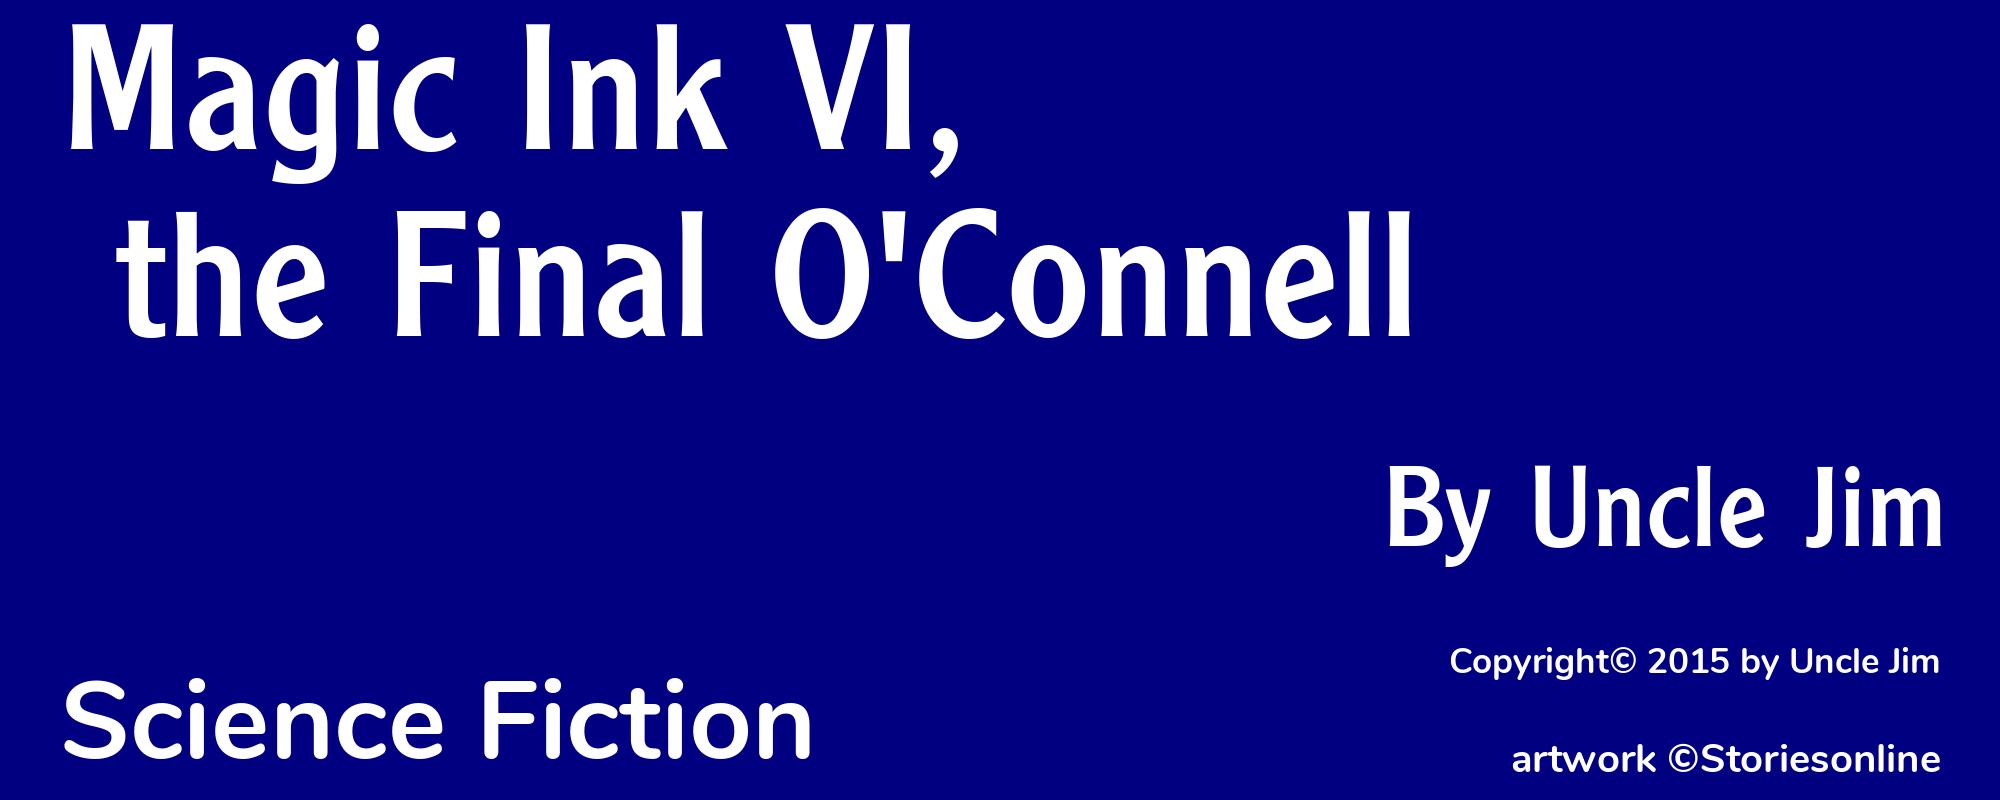 Magic Ink VI, the Final O'Connell - Cover